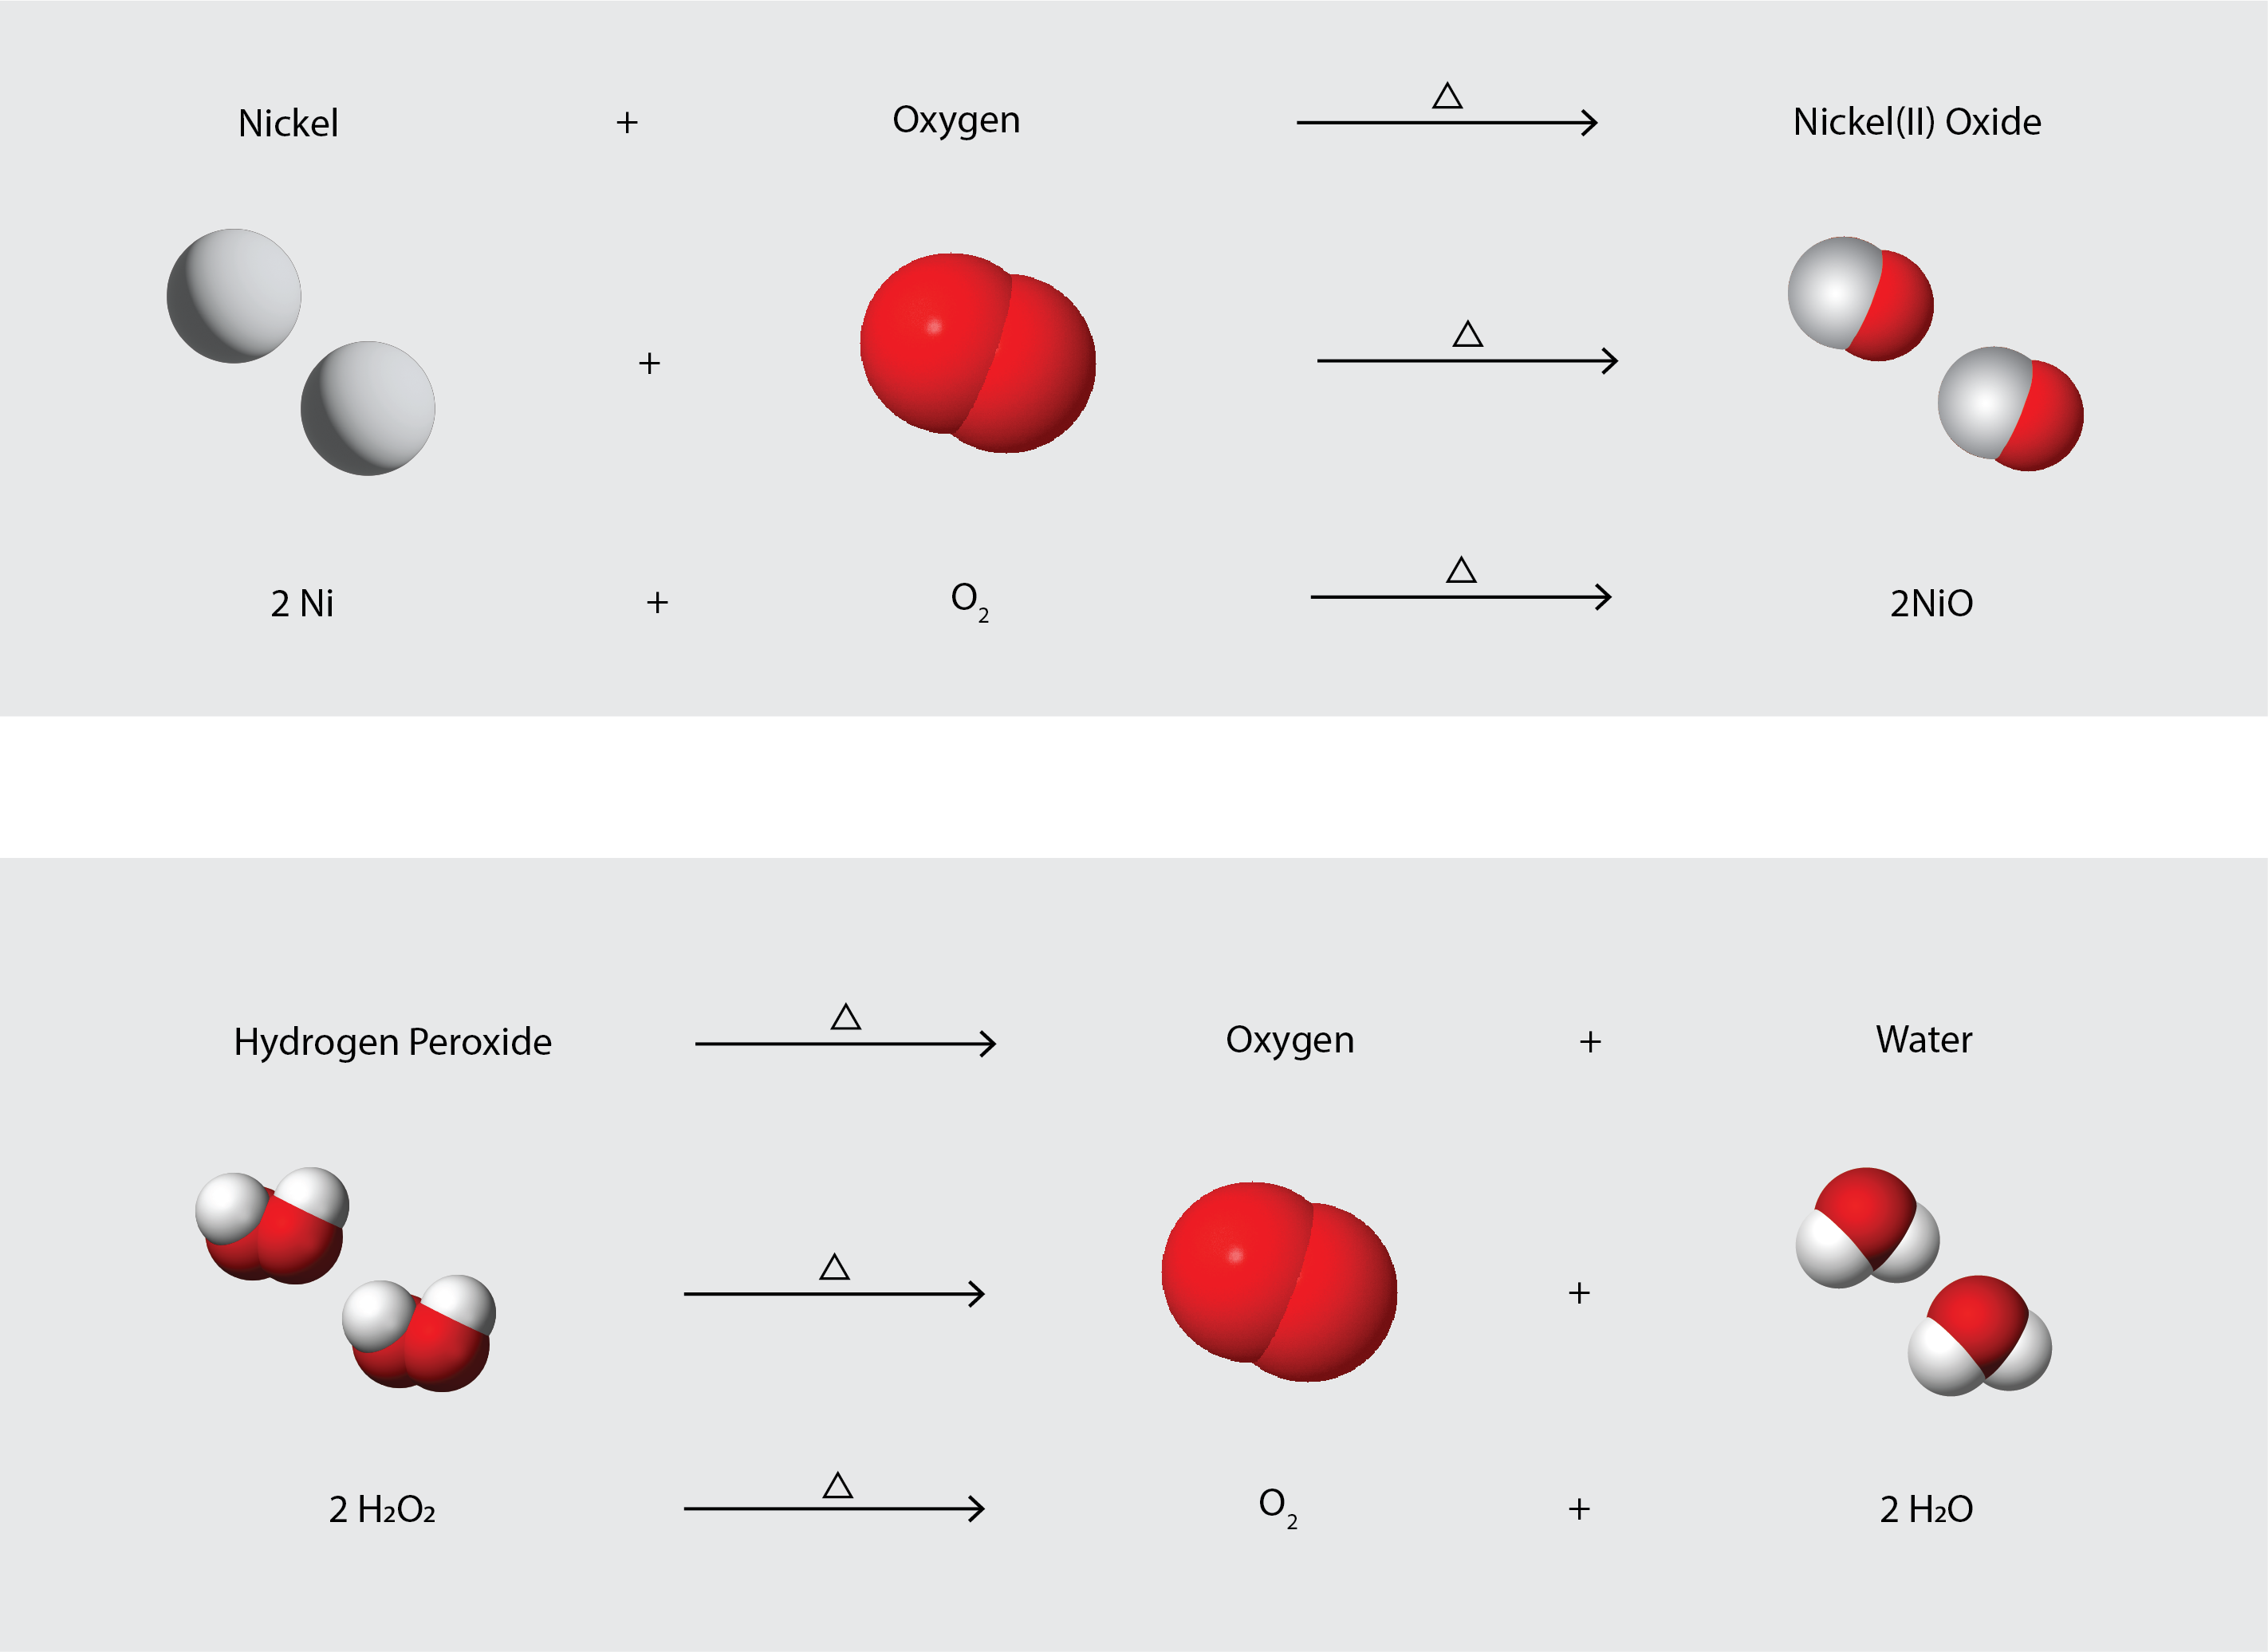 Two chemical reactions are shown in word, model and symbol form. In the first, 2 atoms of nickel combine with one diatomic molecule of oxygen to form two molecules of nickel (II) oxide (one nickel atom bonded to one oxygen atom). Heat is required to allow the reaction to occur. In the second, two molecules of hydrogen peroxide (hydrogen atom bonded to oxygen atom bonded to oxygen atom bonded to hydrogen atom) decompose to form one molecule of diatomic oxygen and two molecules of water (one oxygen atom bonded to two hydrogen atoms).